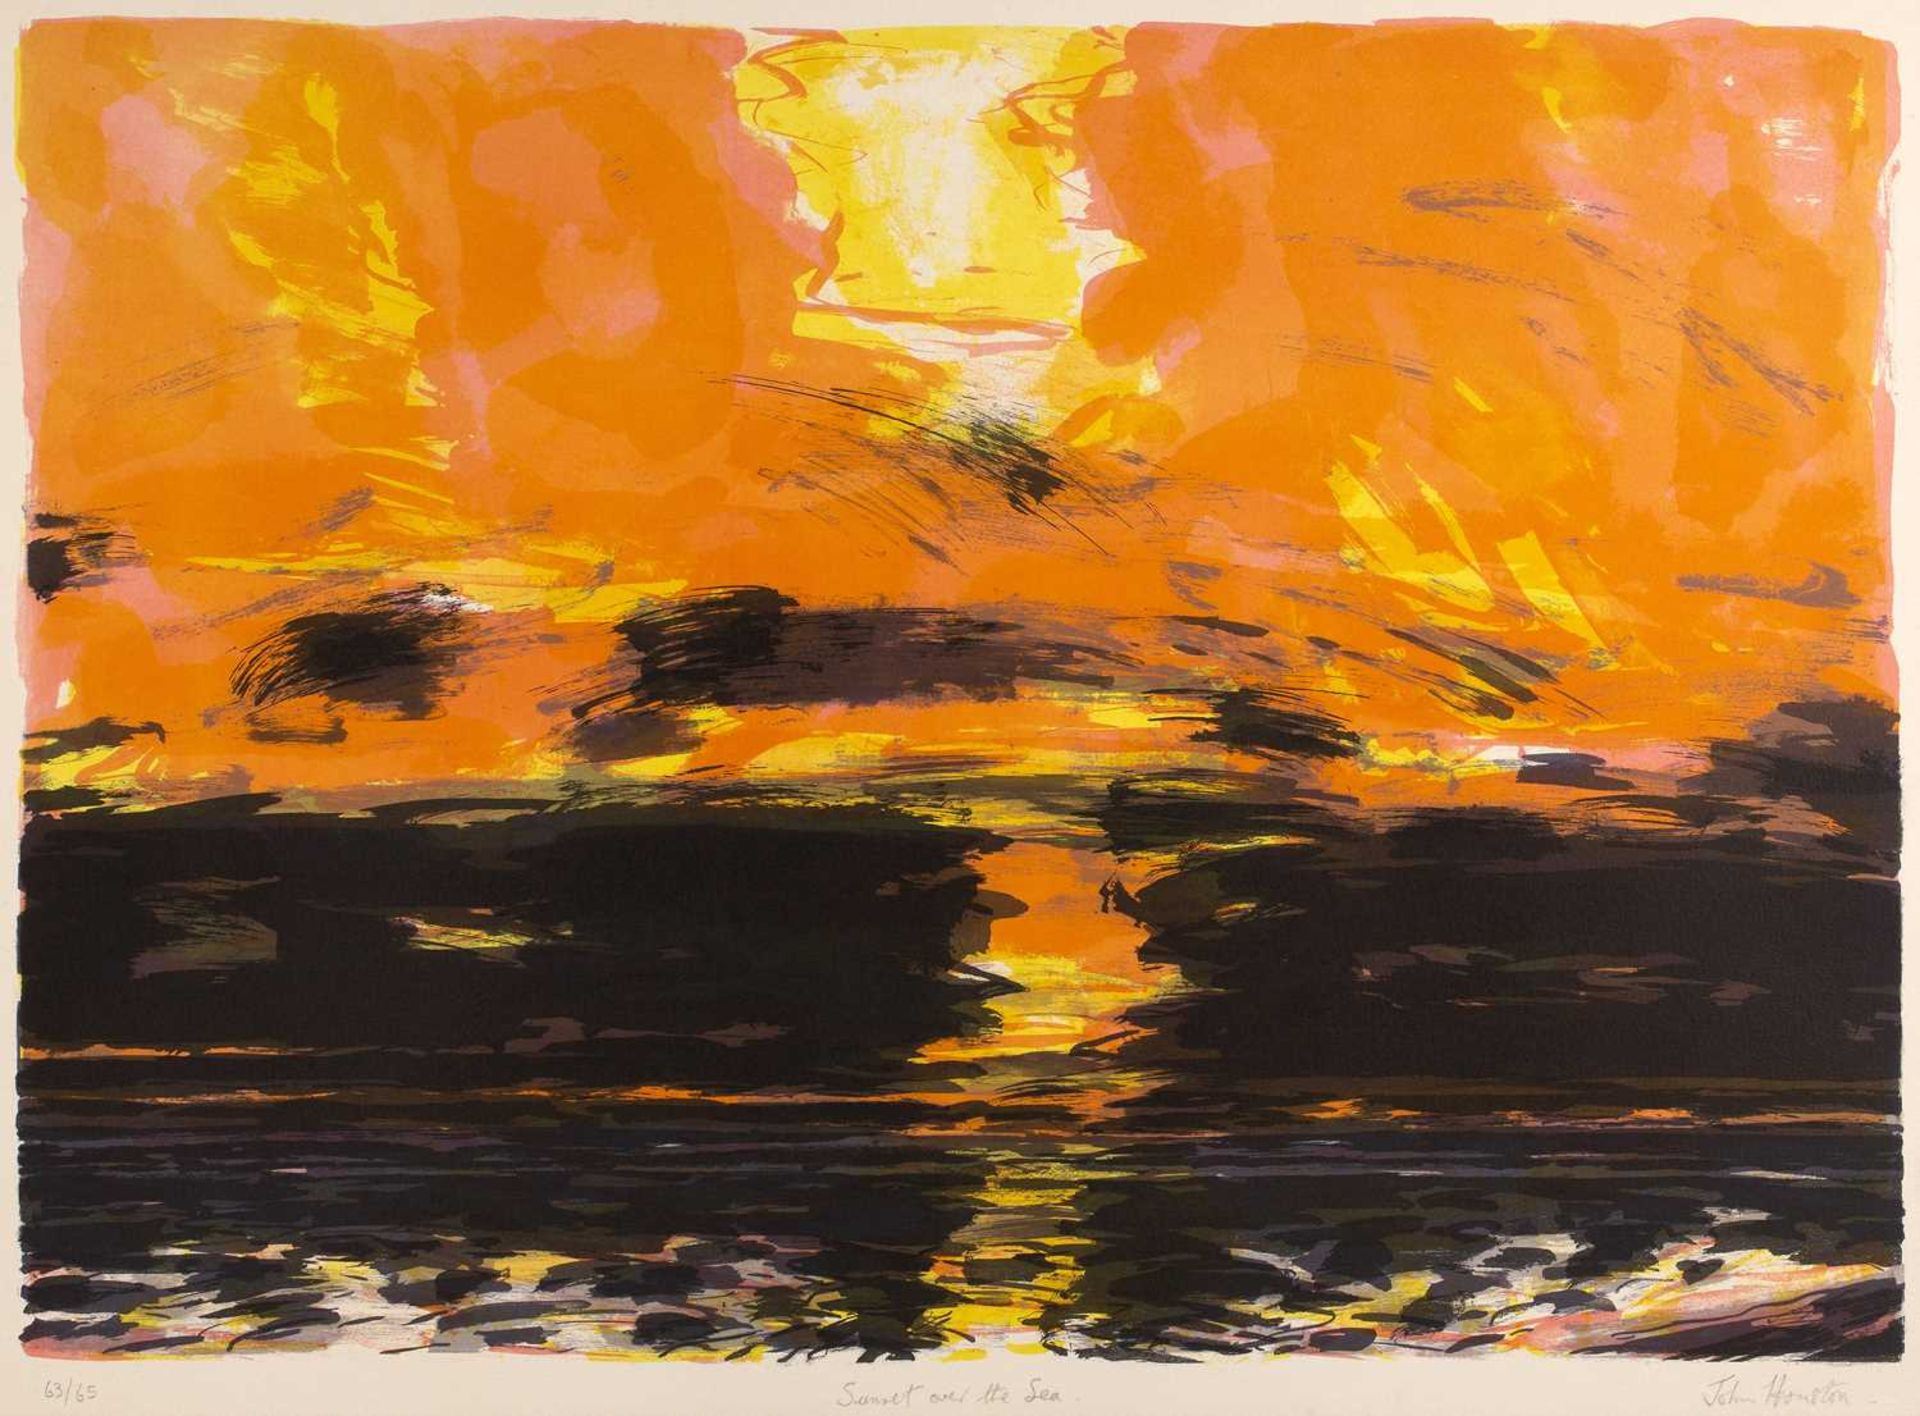 John Houston (1930-2008) Sunset over the Sea 63/65, signed, titled, and numbered in pencil (in the